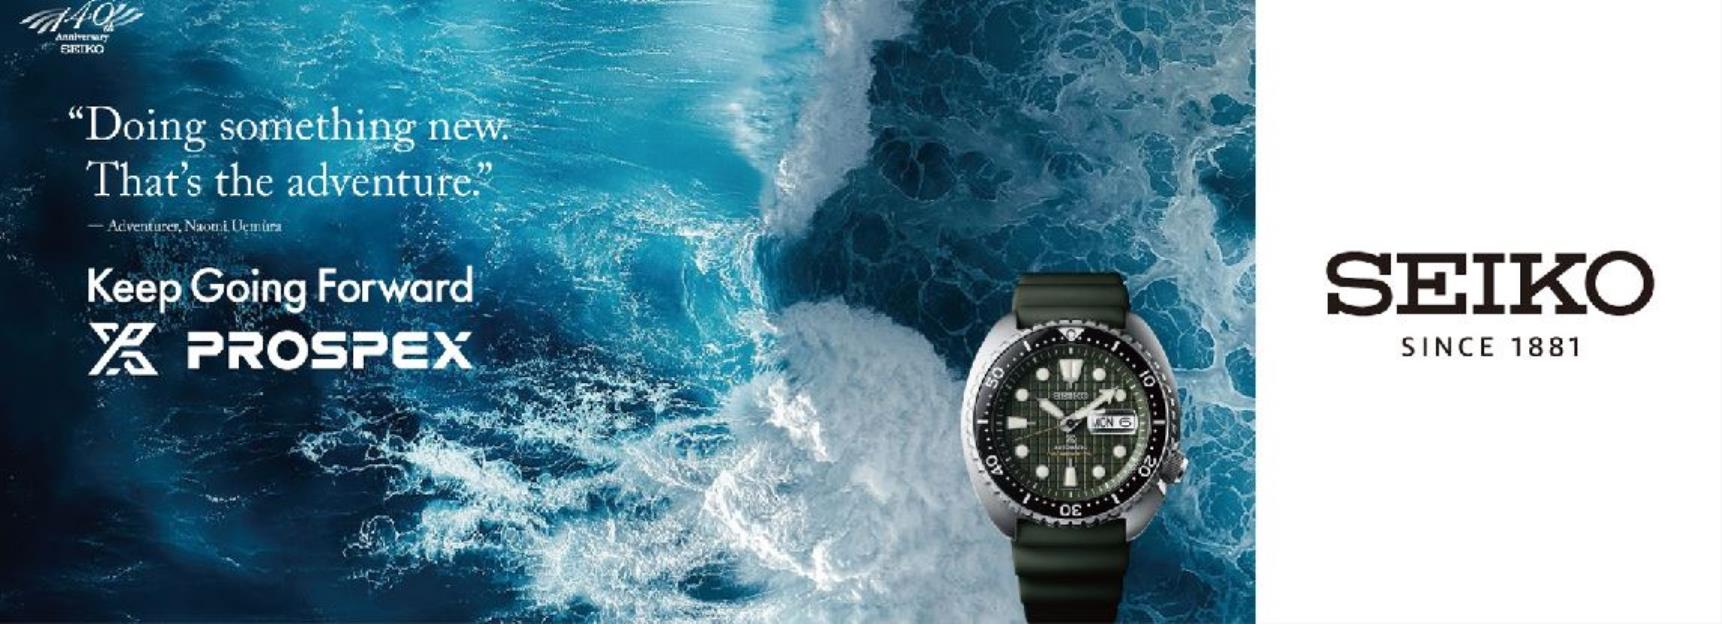 Seiko | Oriental Watch Company Official Website